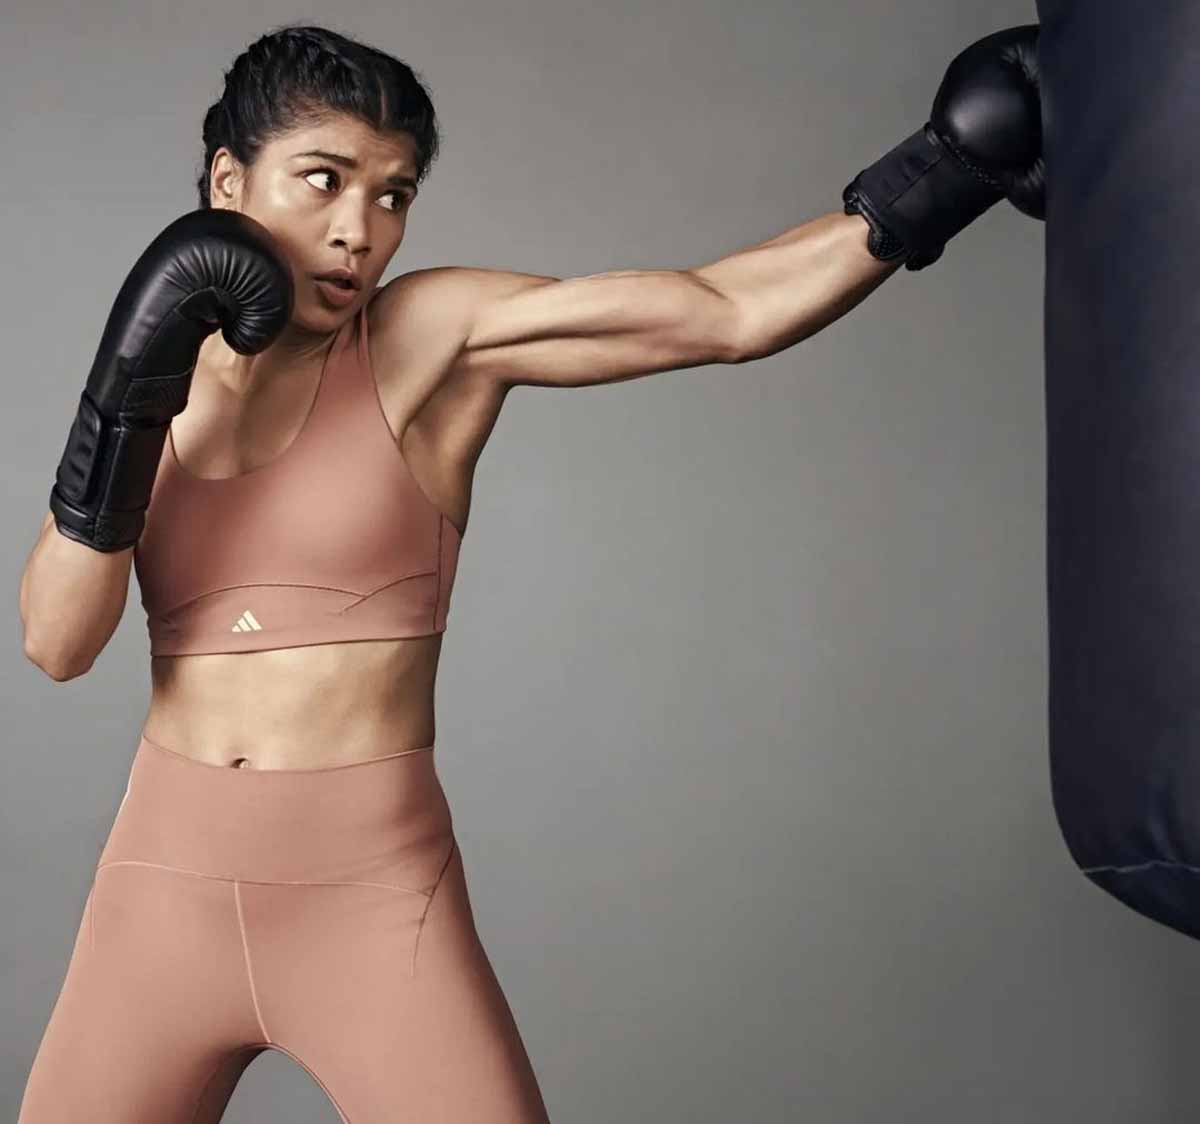 Can Nikhat finally step out of Mary Kom's shadow?